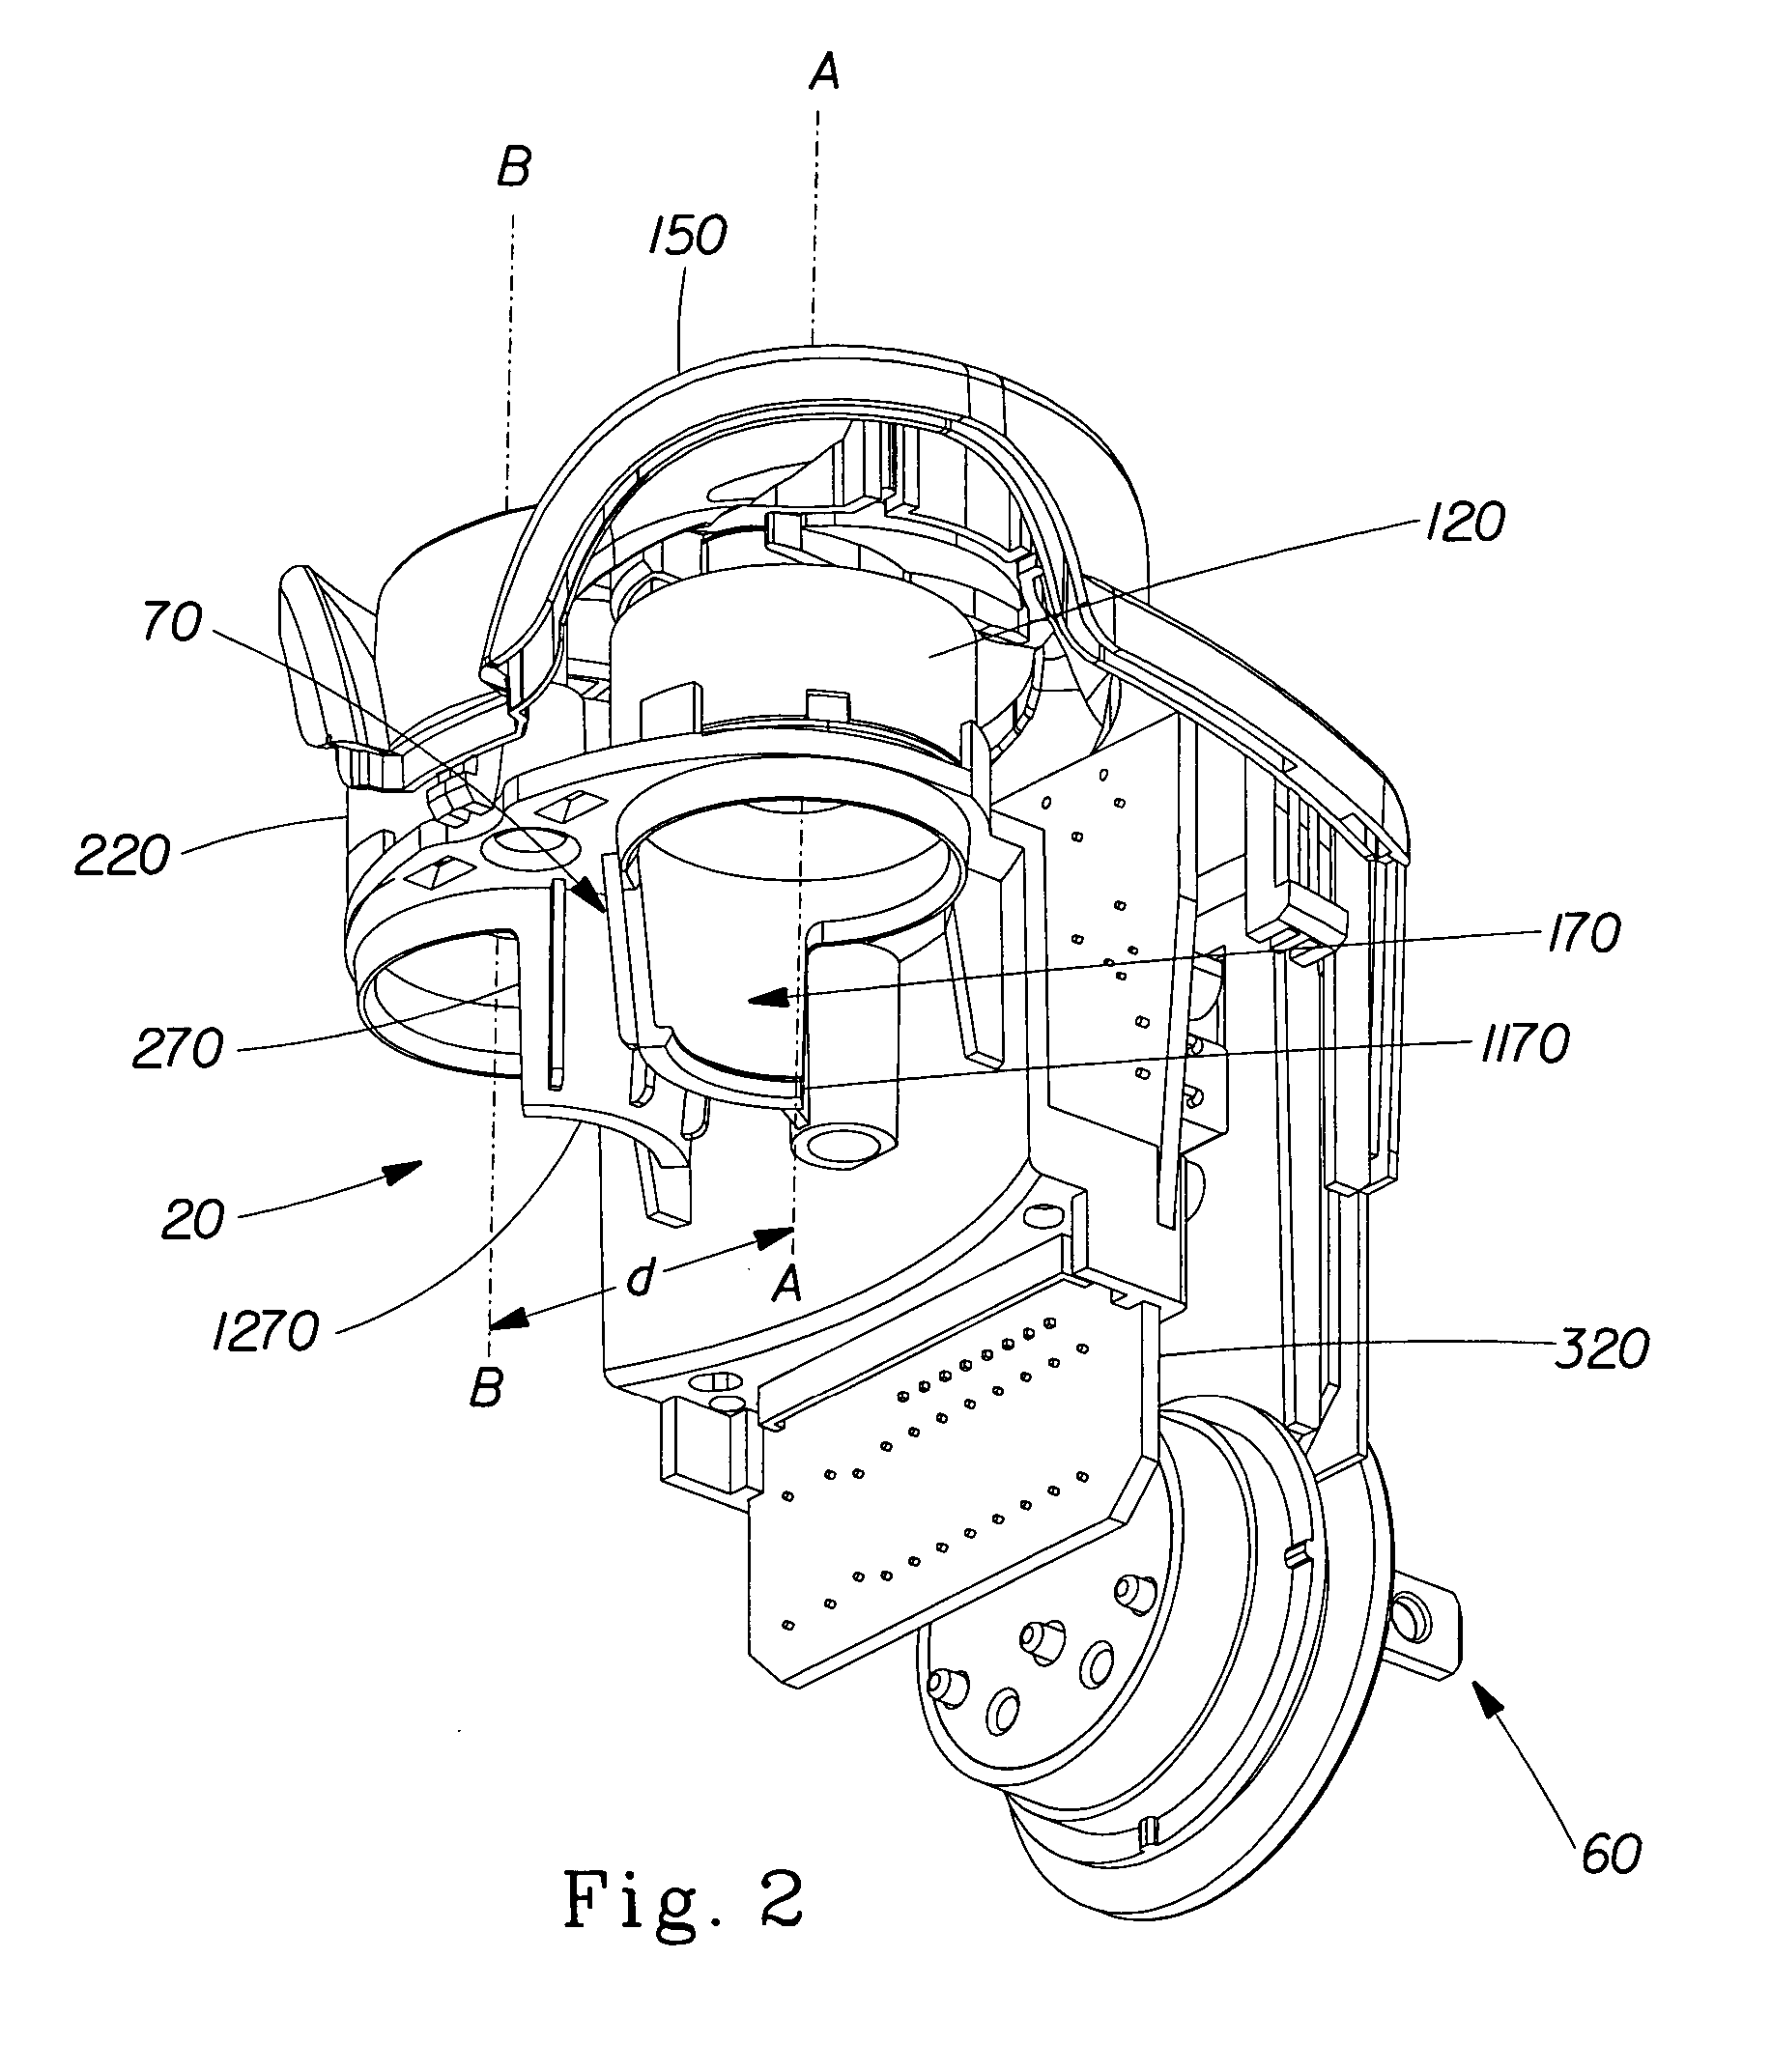 Device and containers for emitting volatile compositions